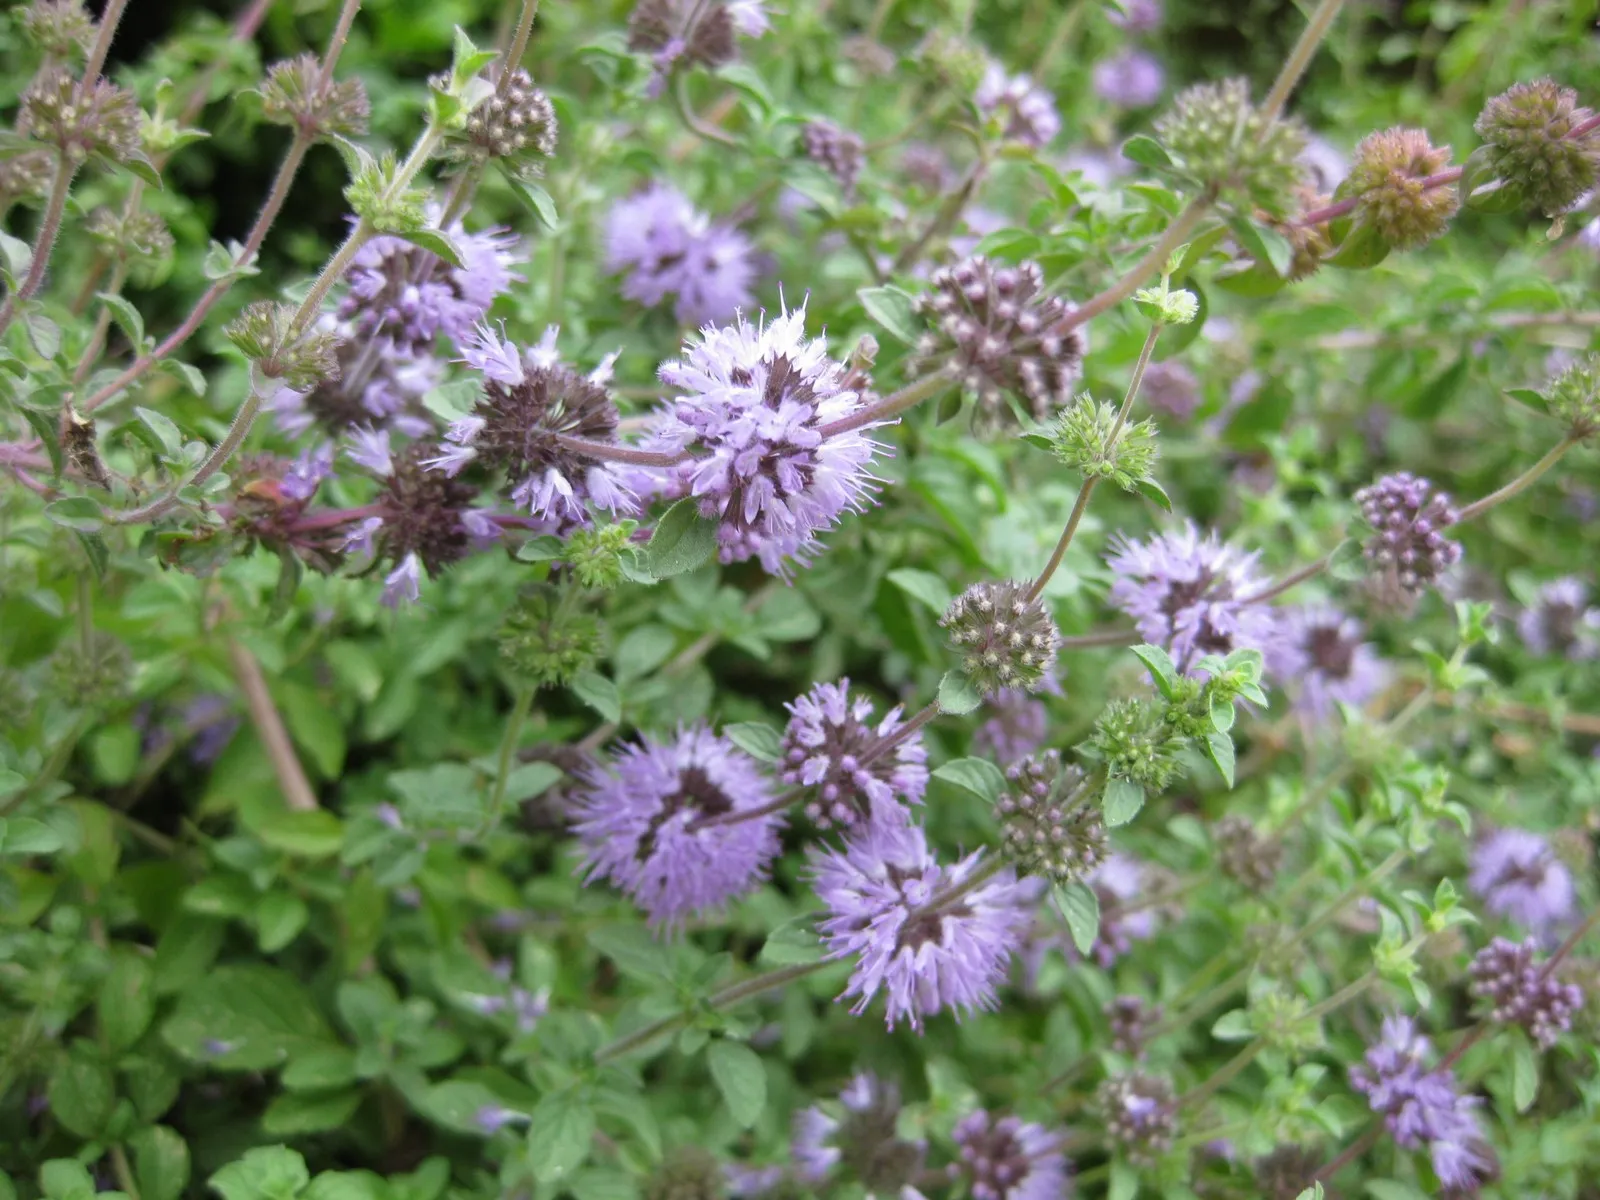 Pennyroyal blooms and leaves